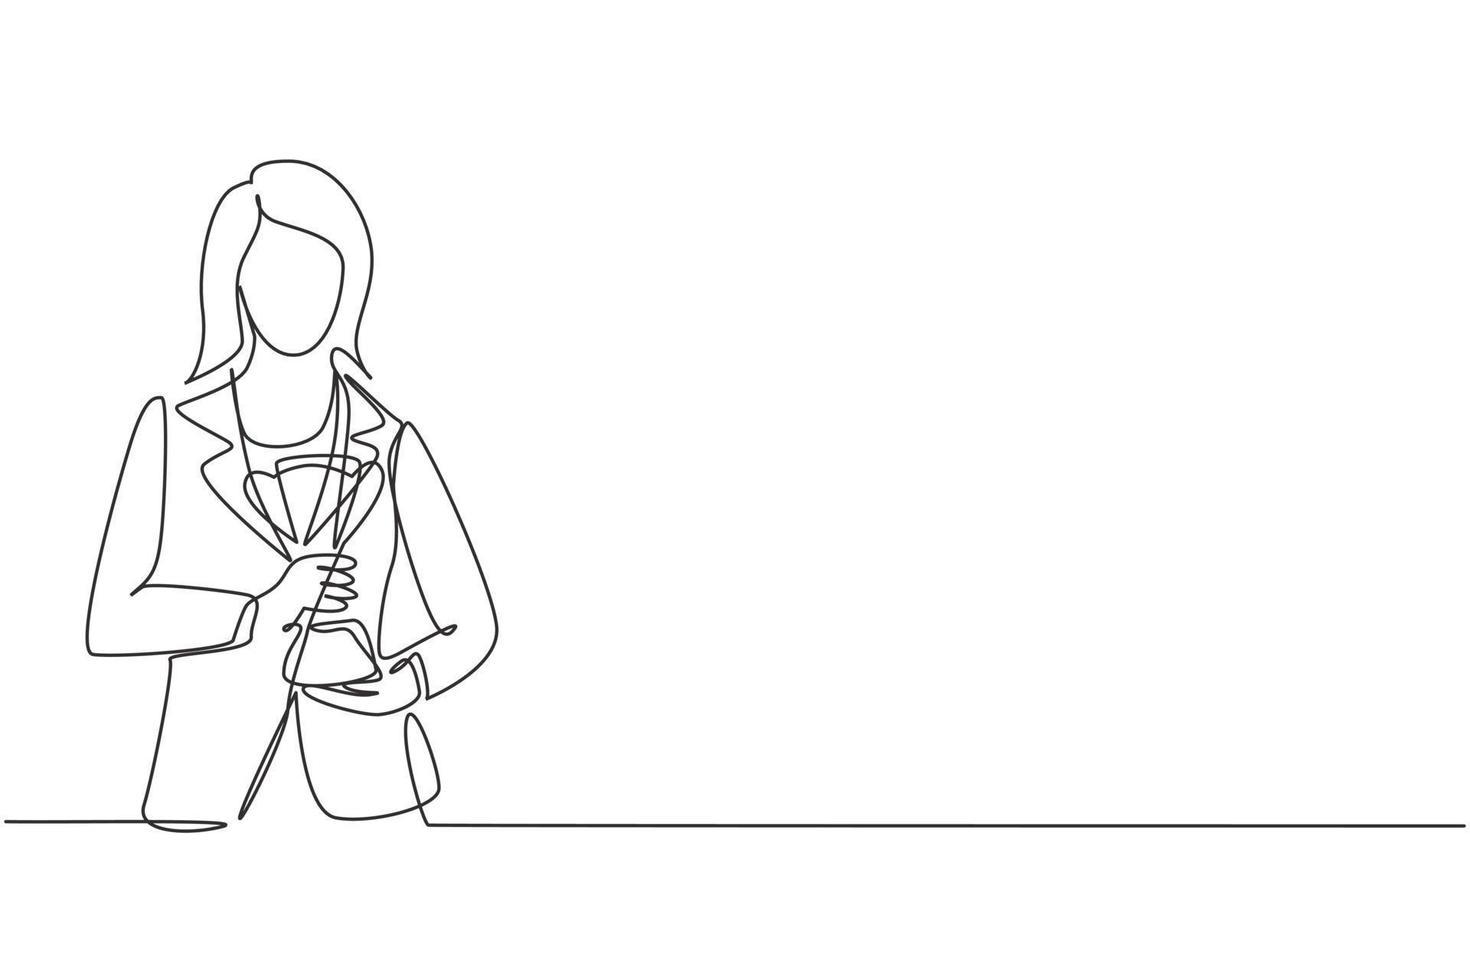 Continuous one line drawing young businesswoman wearing blazer holding golden trophy with both hands. Symbol of achievement business performance. Single line draw design vector graphic illustration